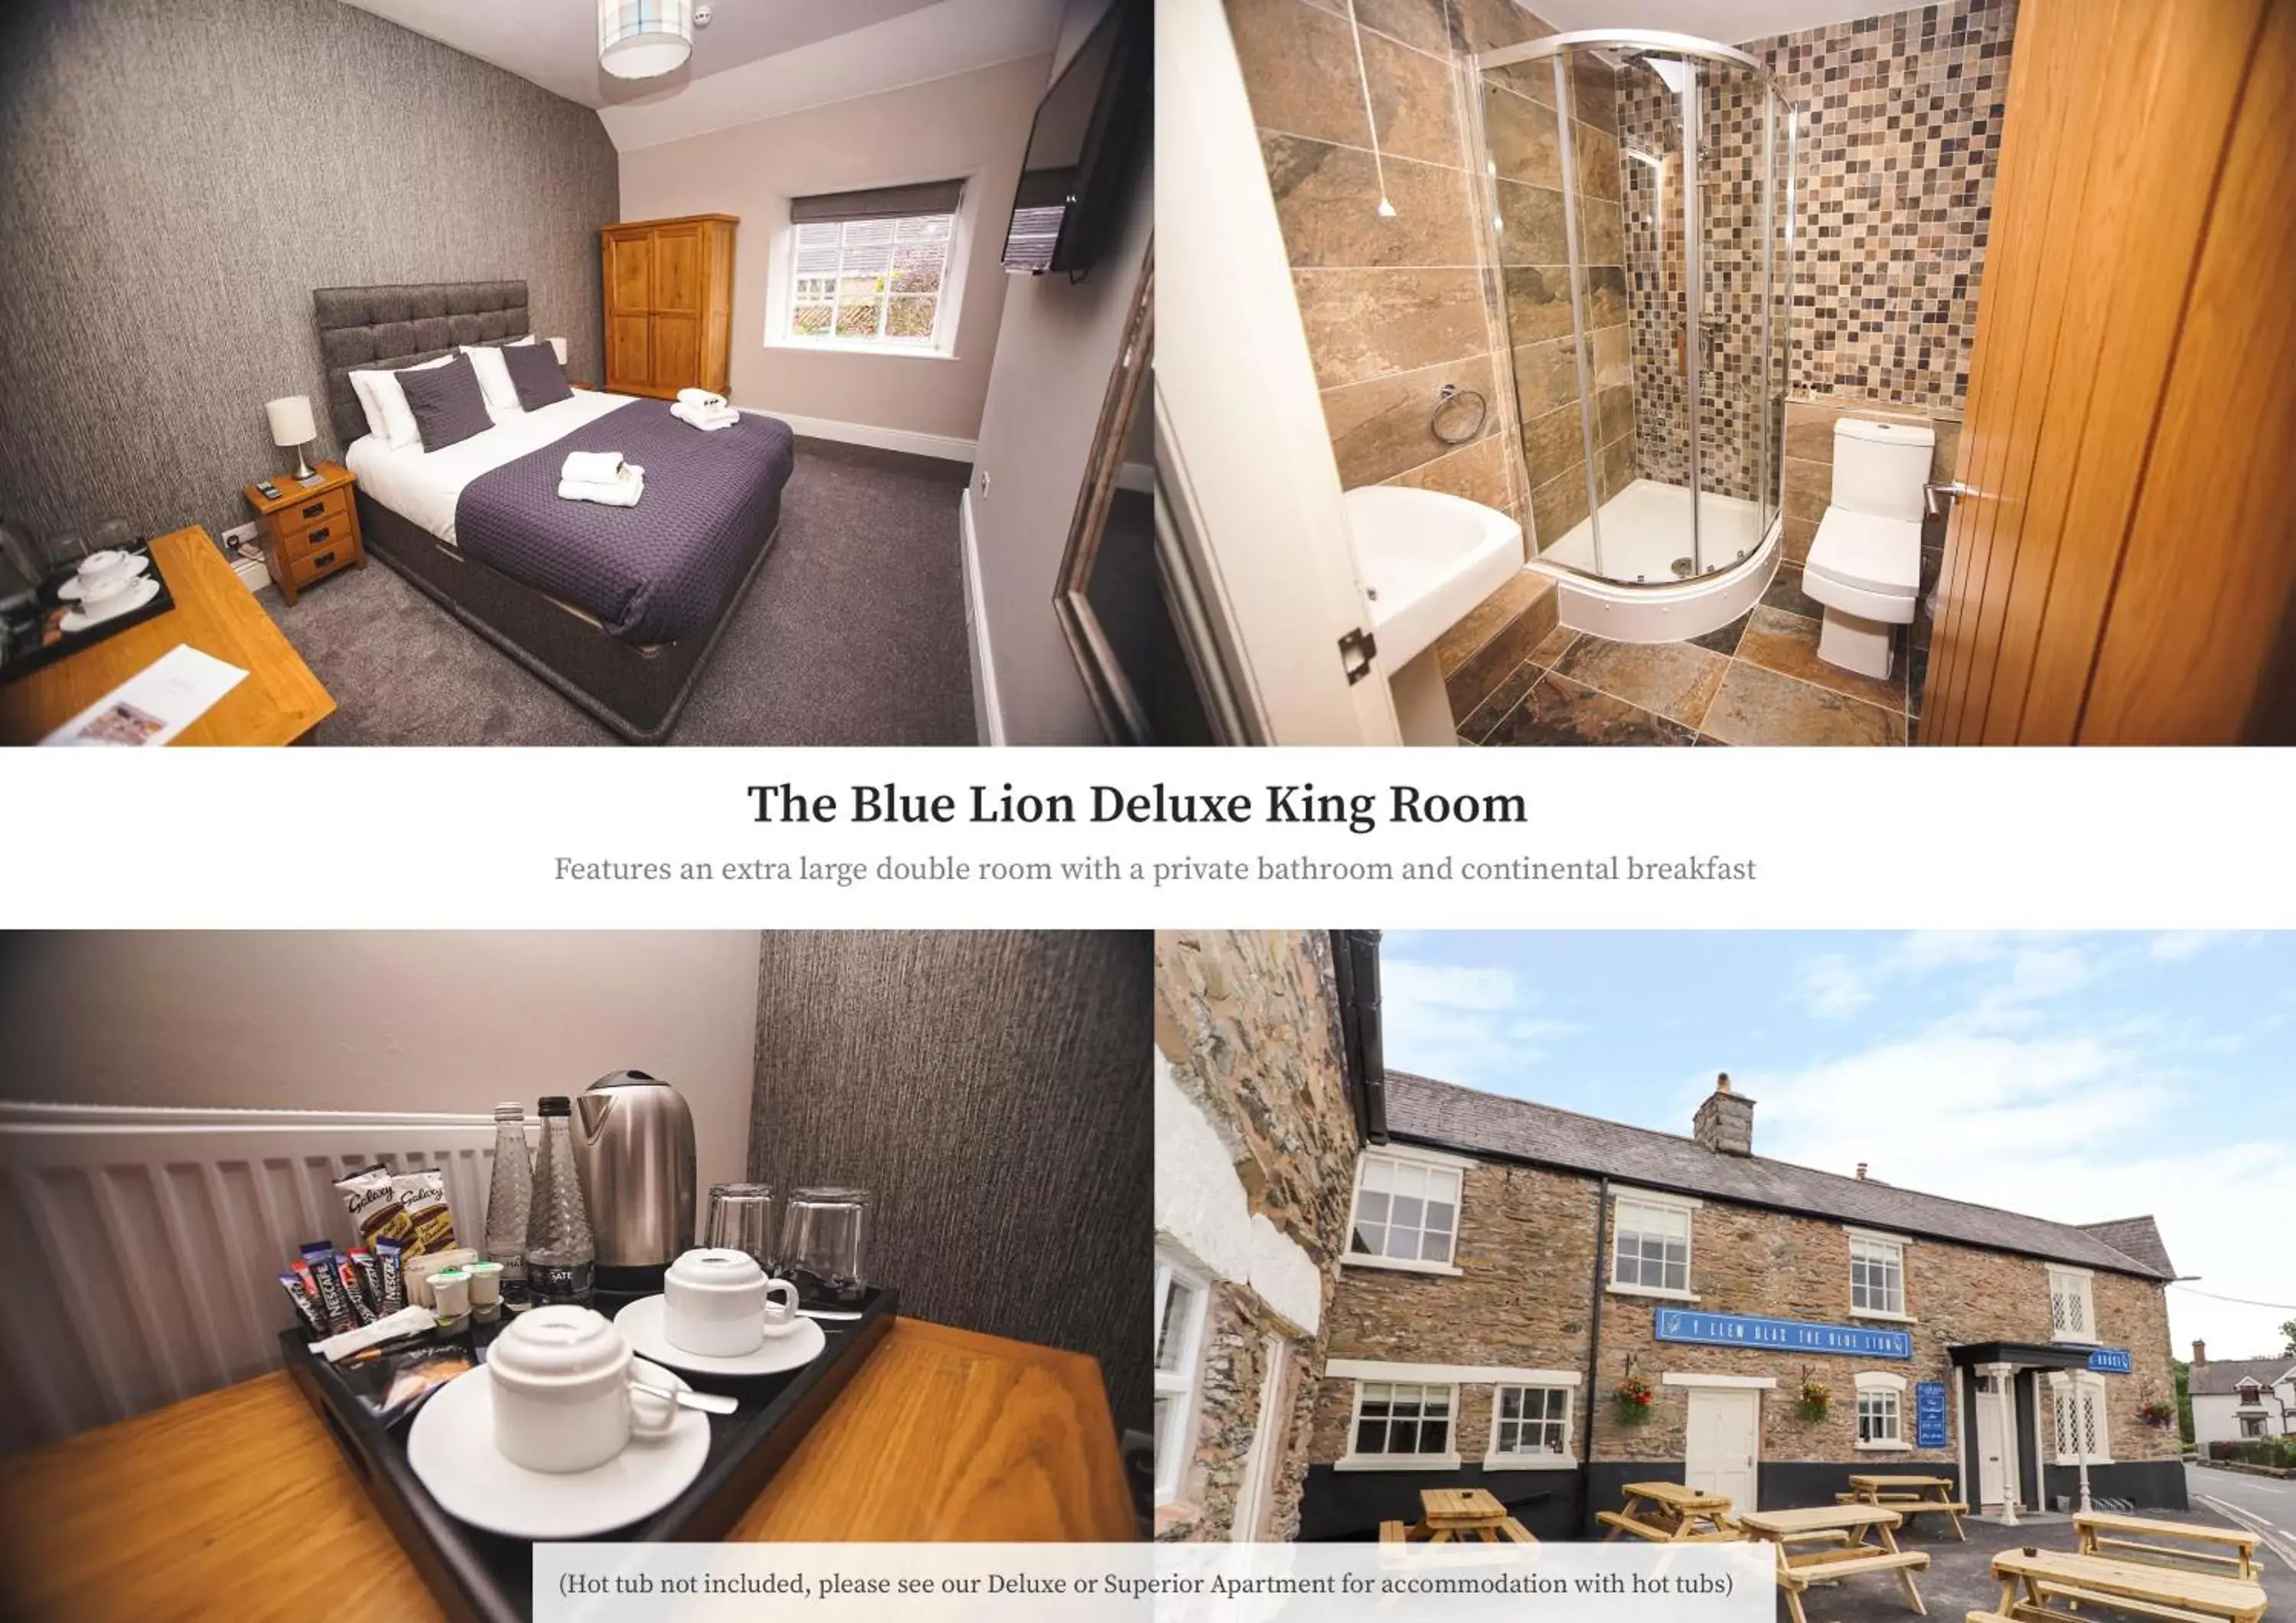 Deluxe King Room in The Blue Lion